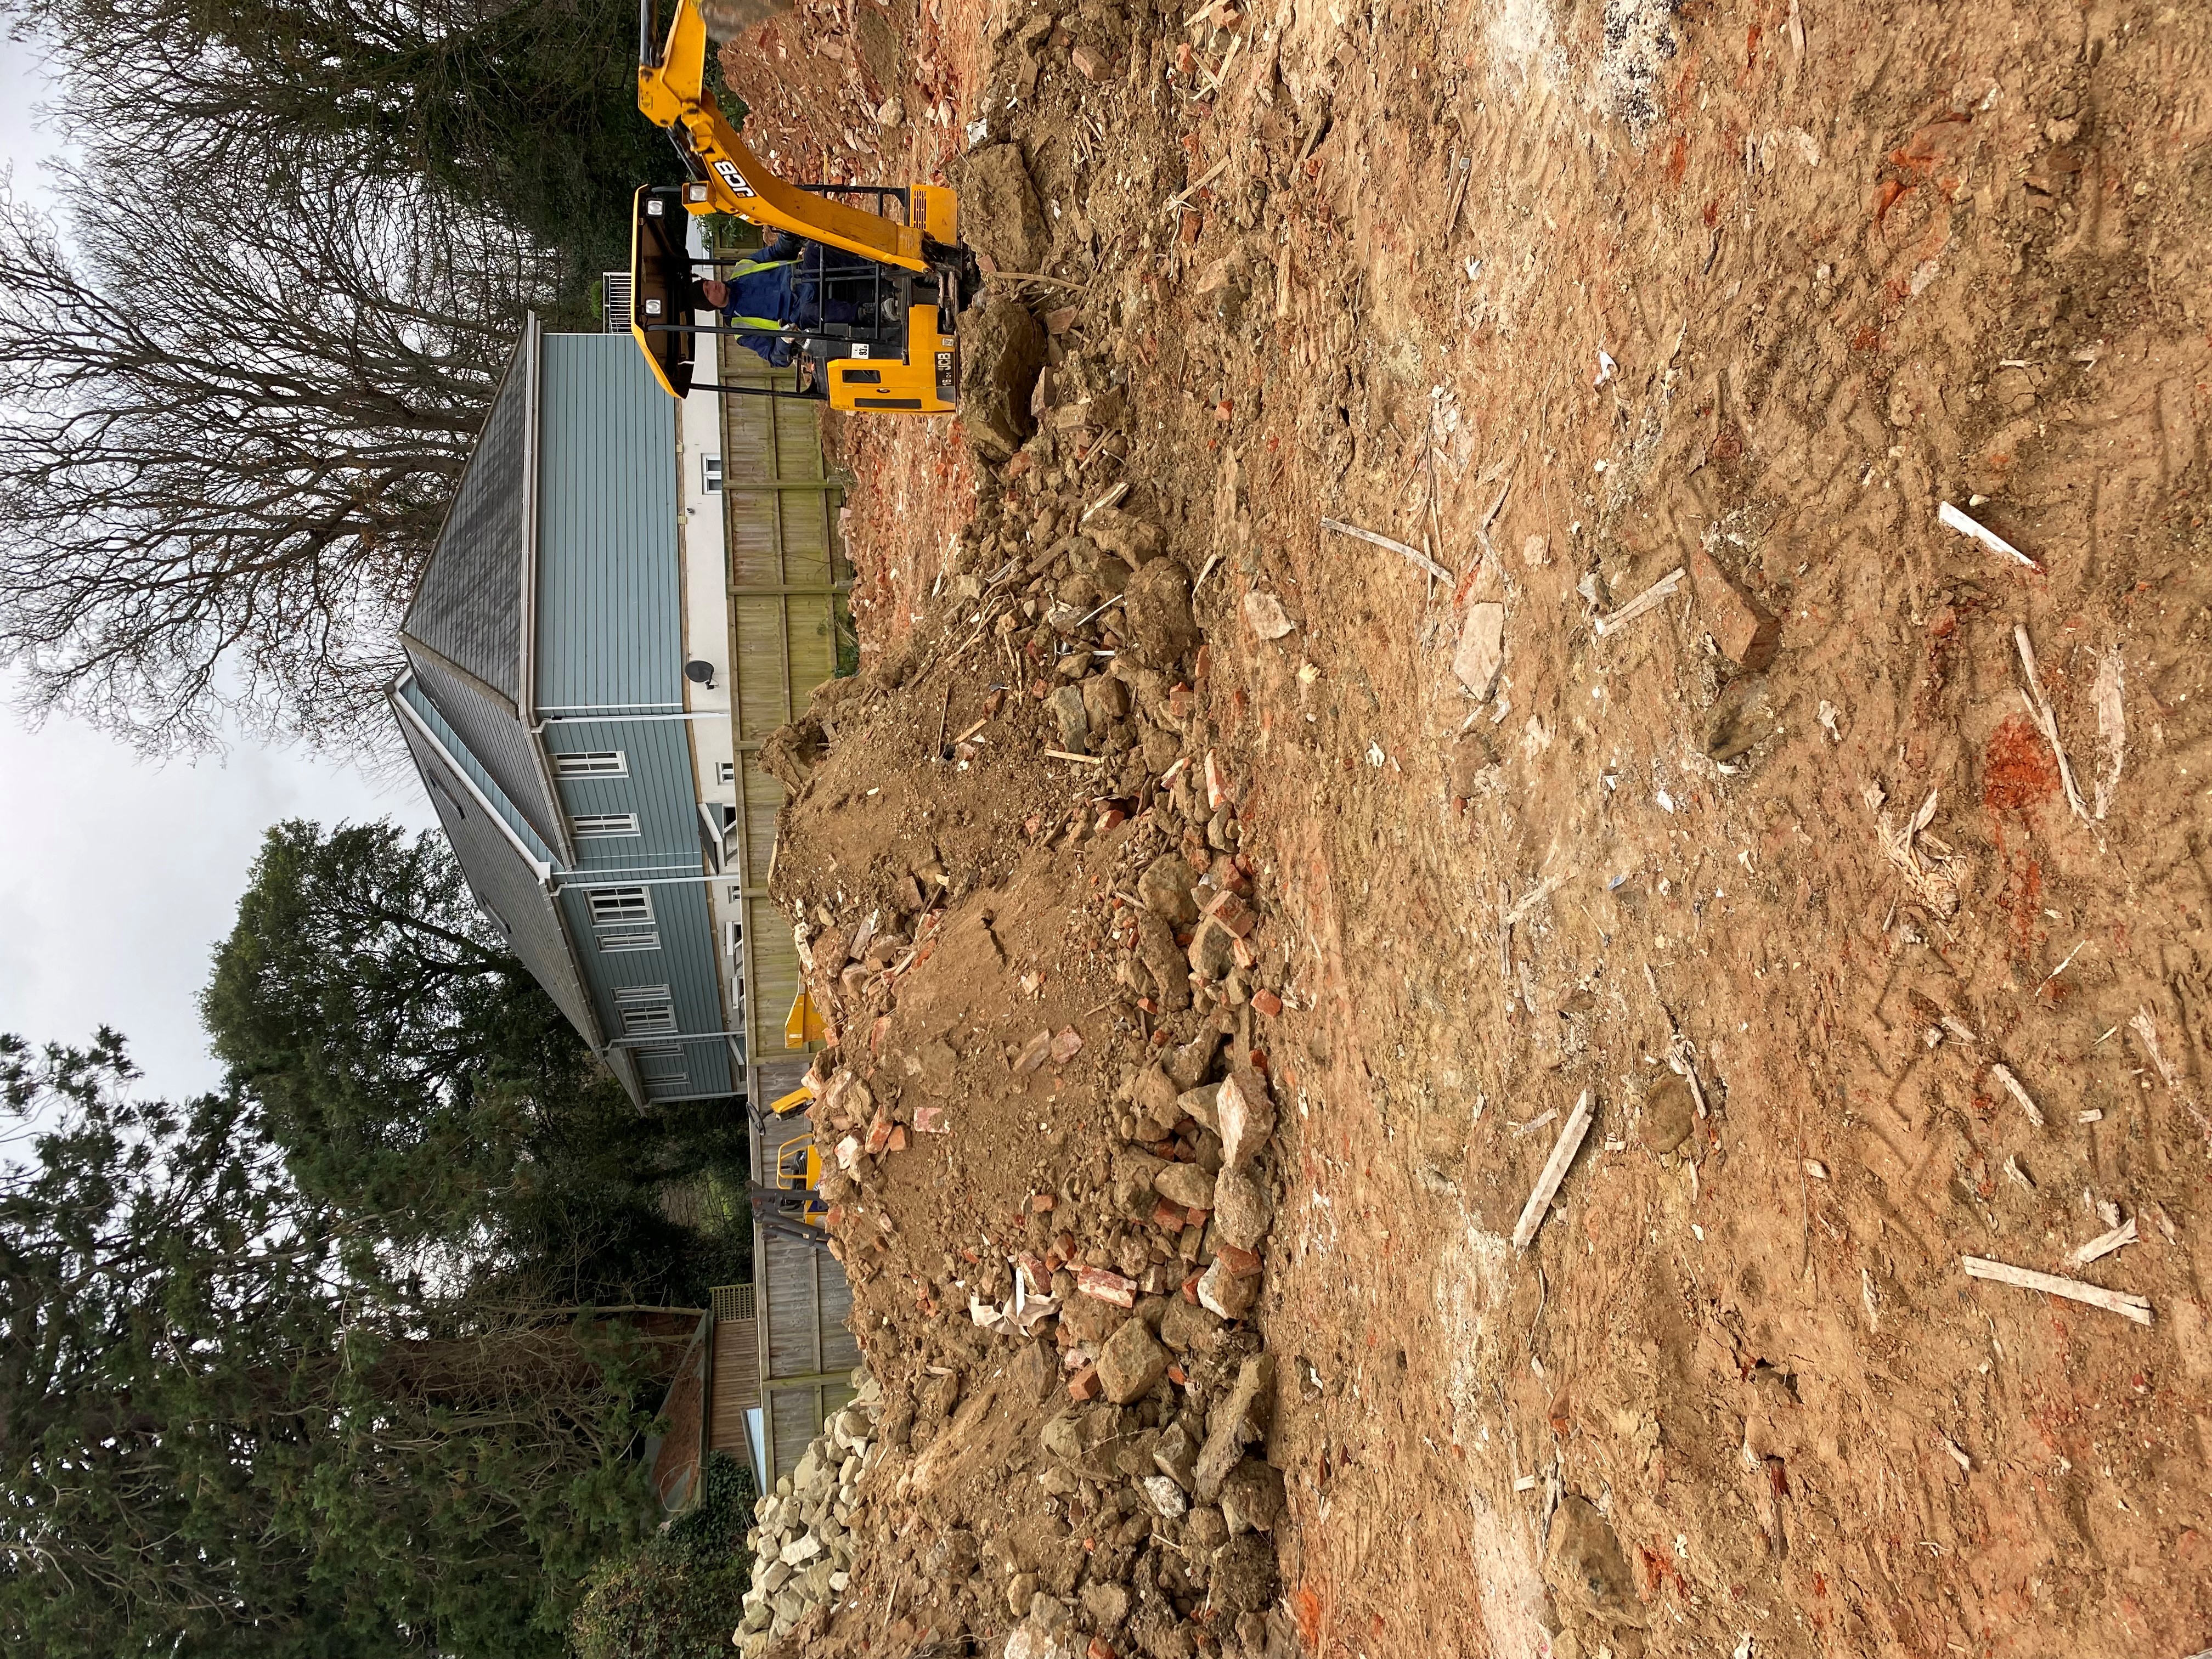 hotel demolished & new footings for new build house